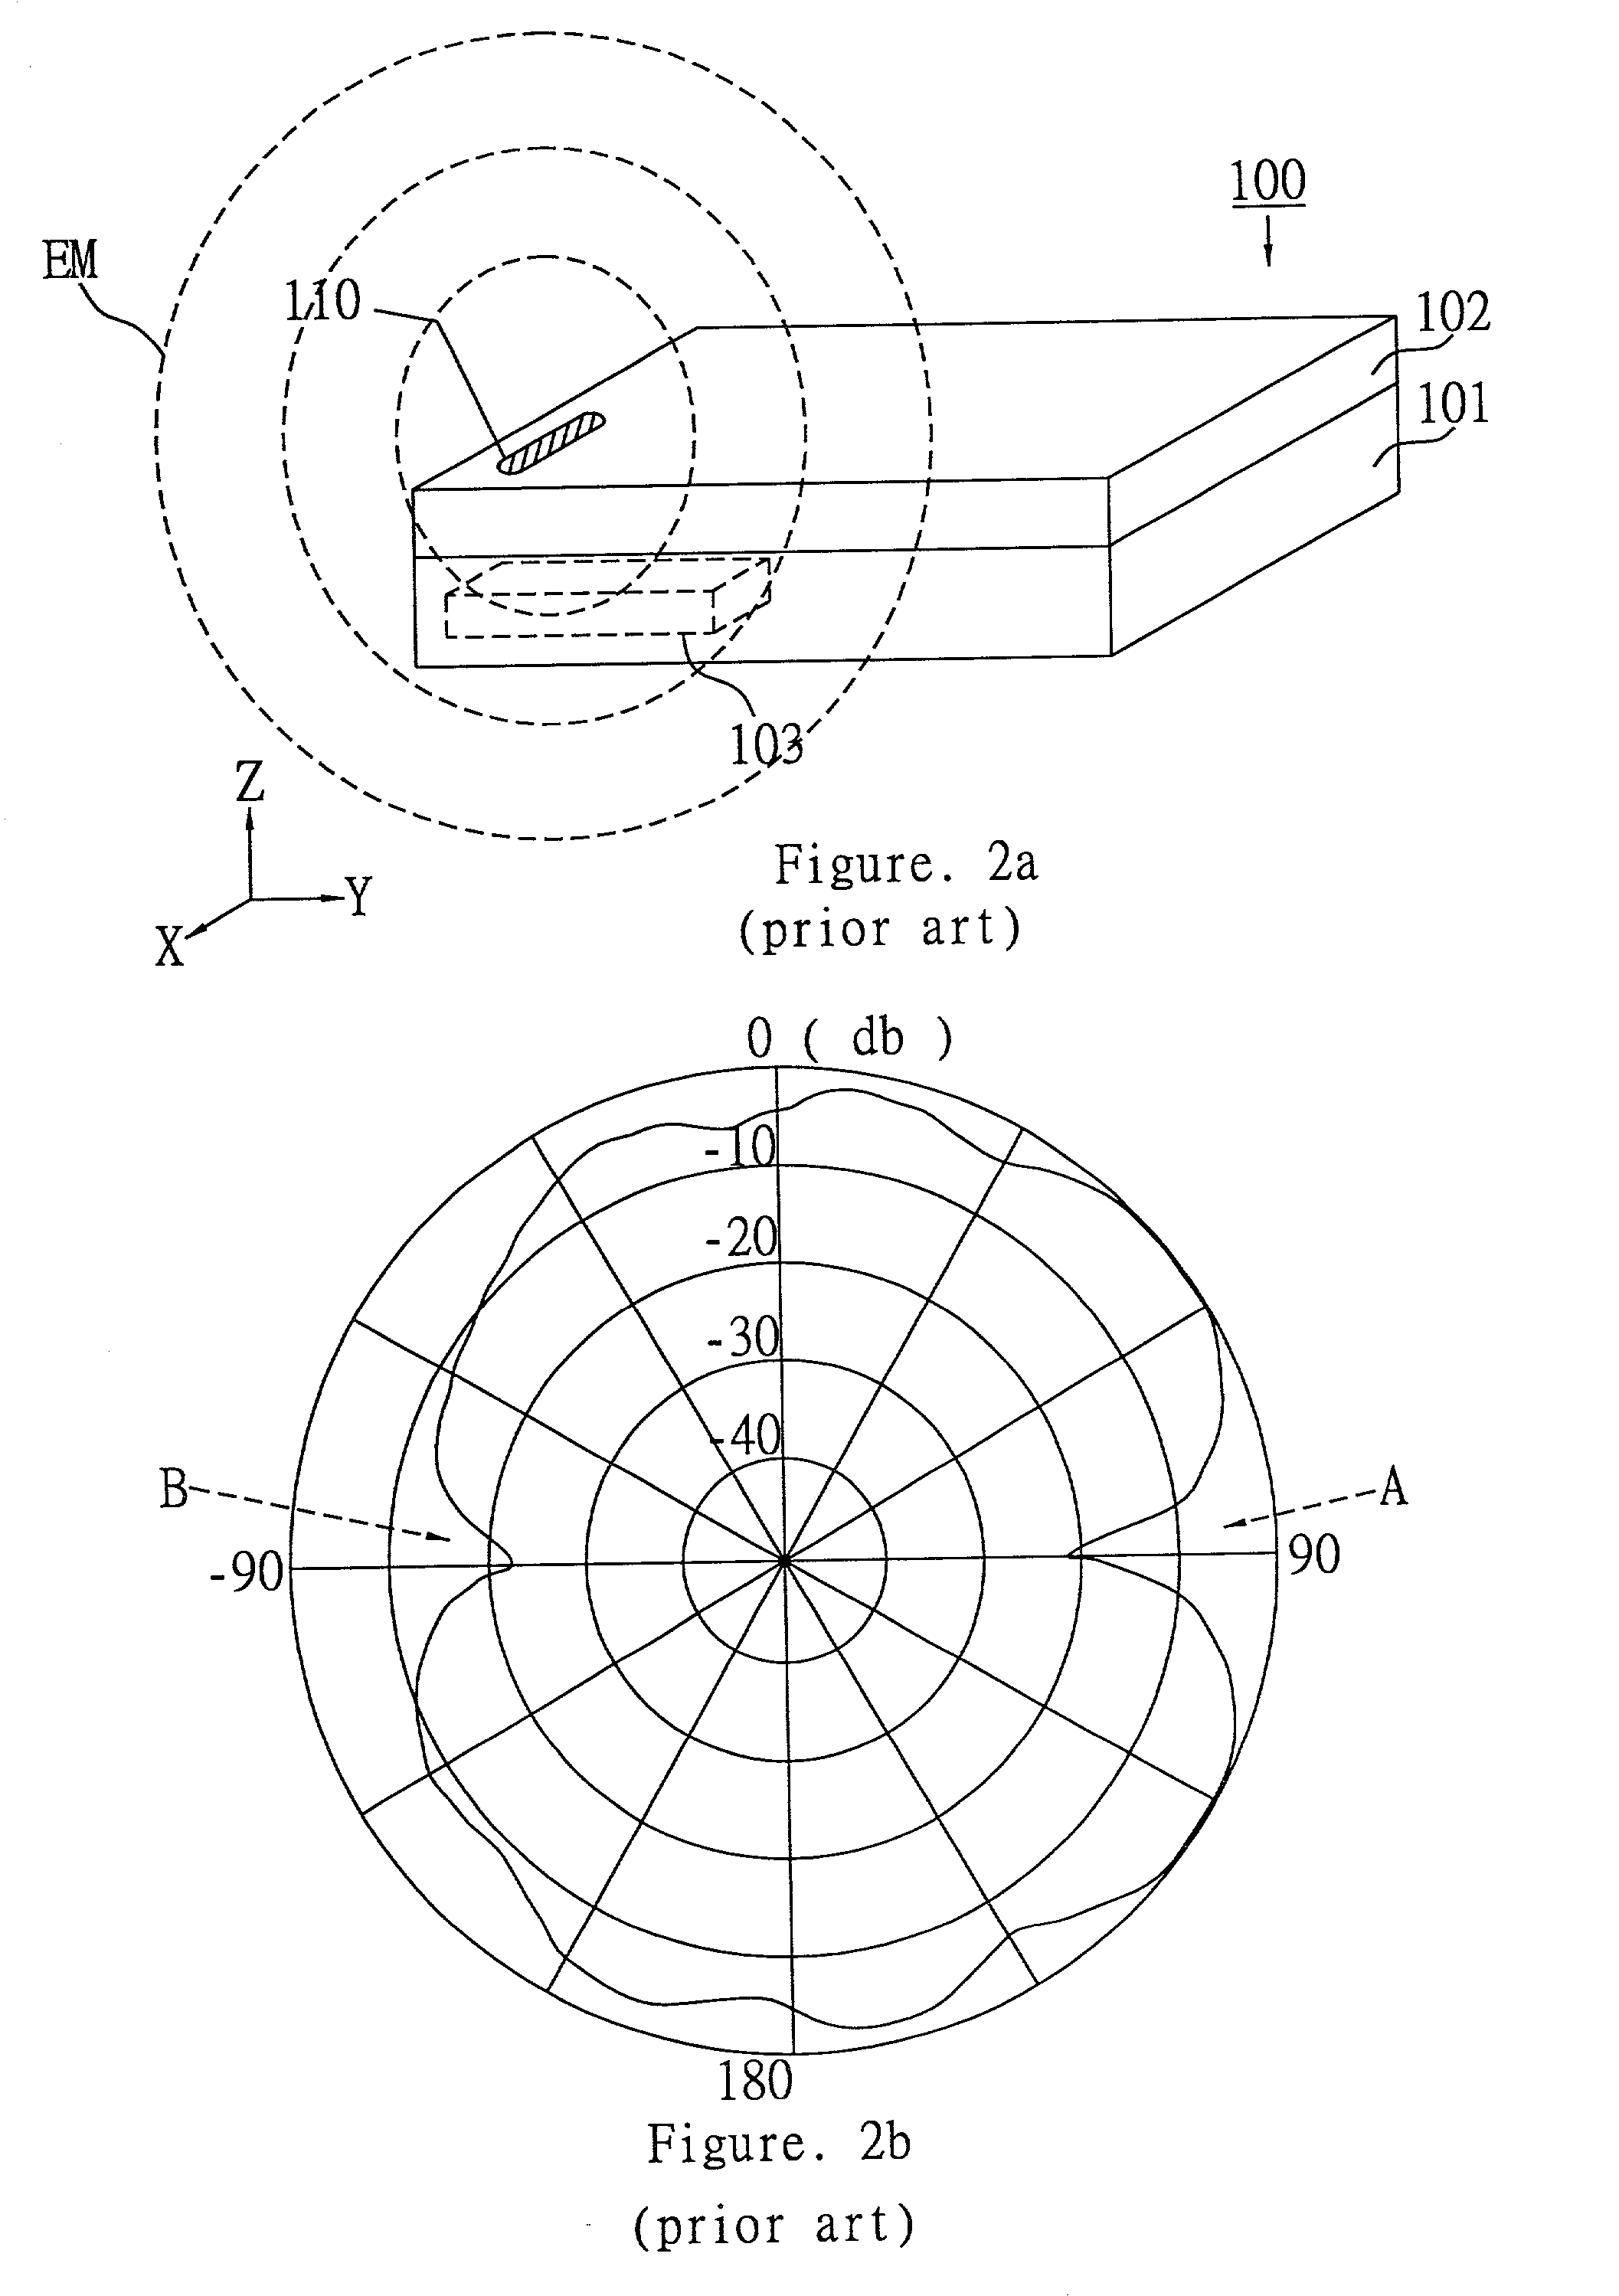 Switchable omni-directional antennas for wireless device